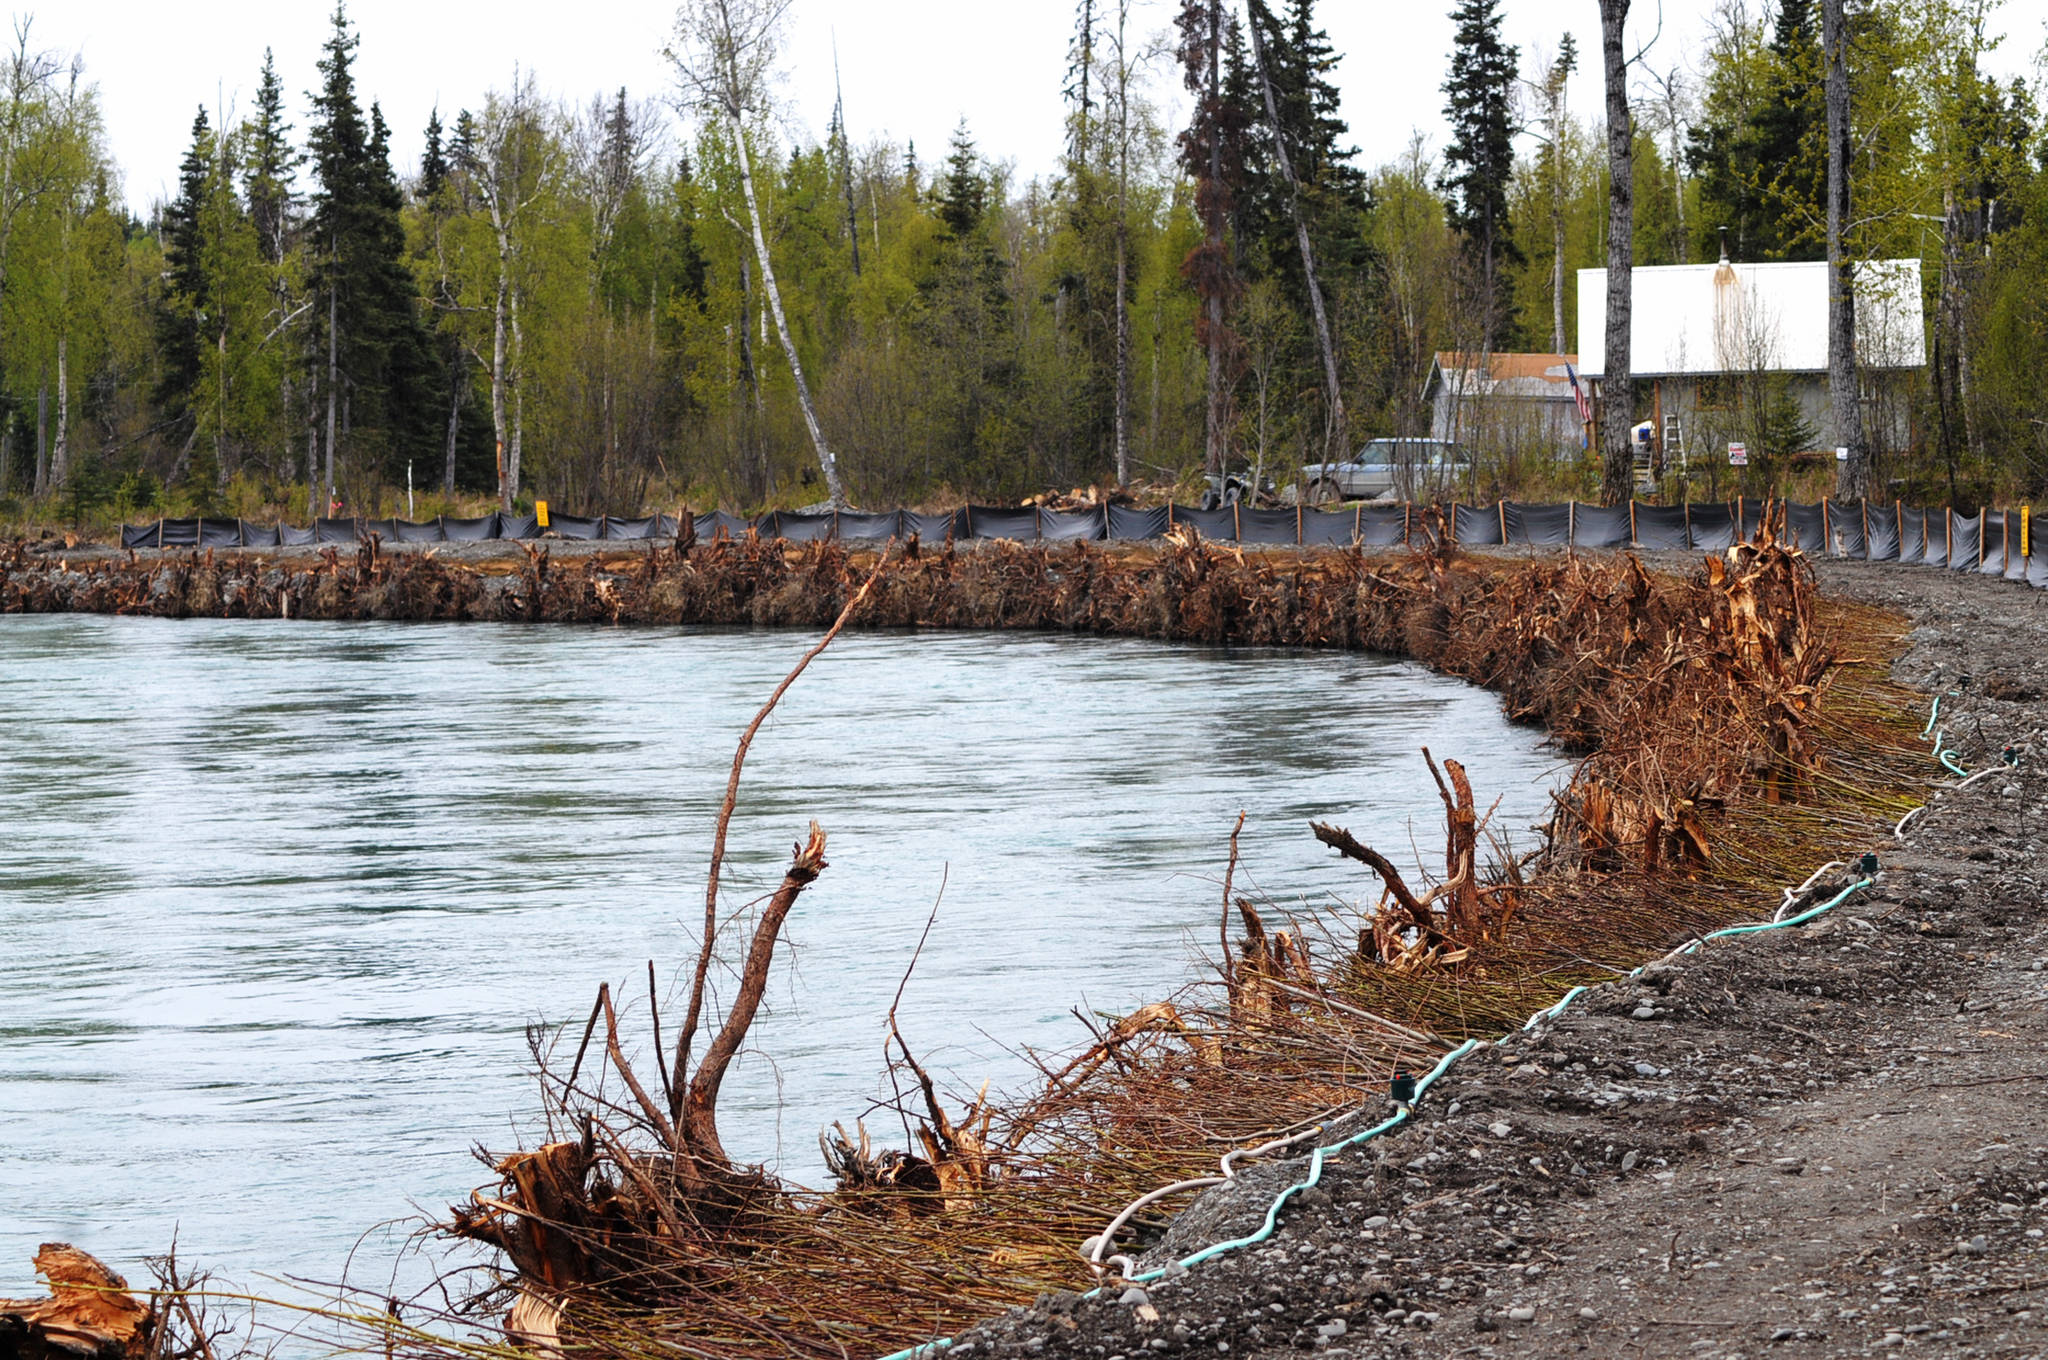 The Kenai River flows by the newly restored riverbank of Dow Island on Saturday, May 27, 2017 in Funny River, Alaska. A group of four property owners banded together this spring to install the extensive project to protect the bank of the island in the Kenai River from rapid erosion. (Elizabeth Earl/Peninsula Clarion)